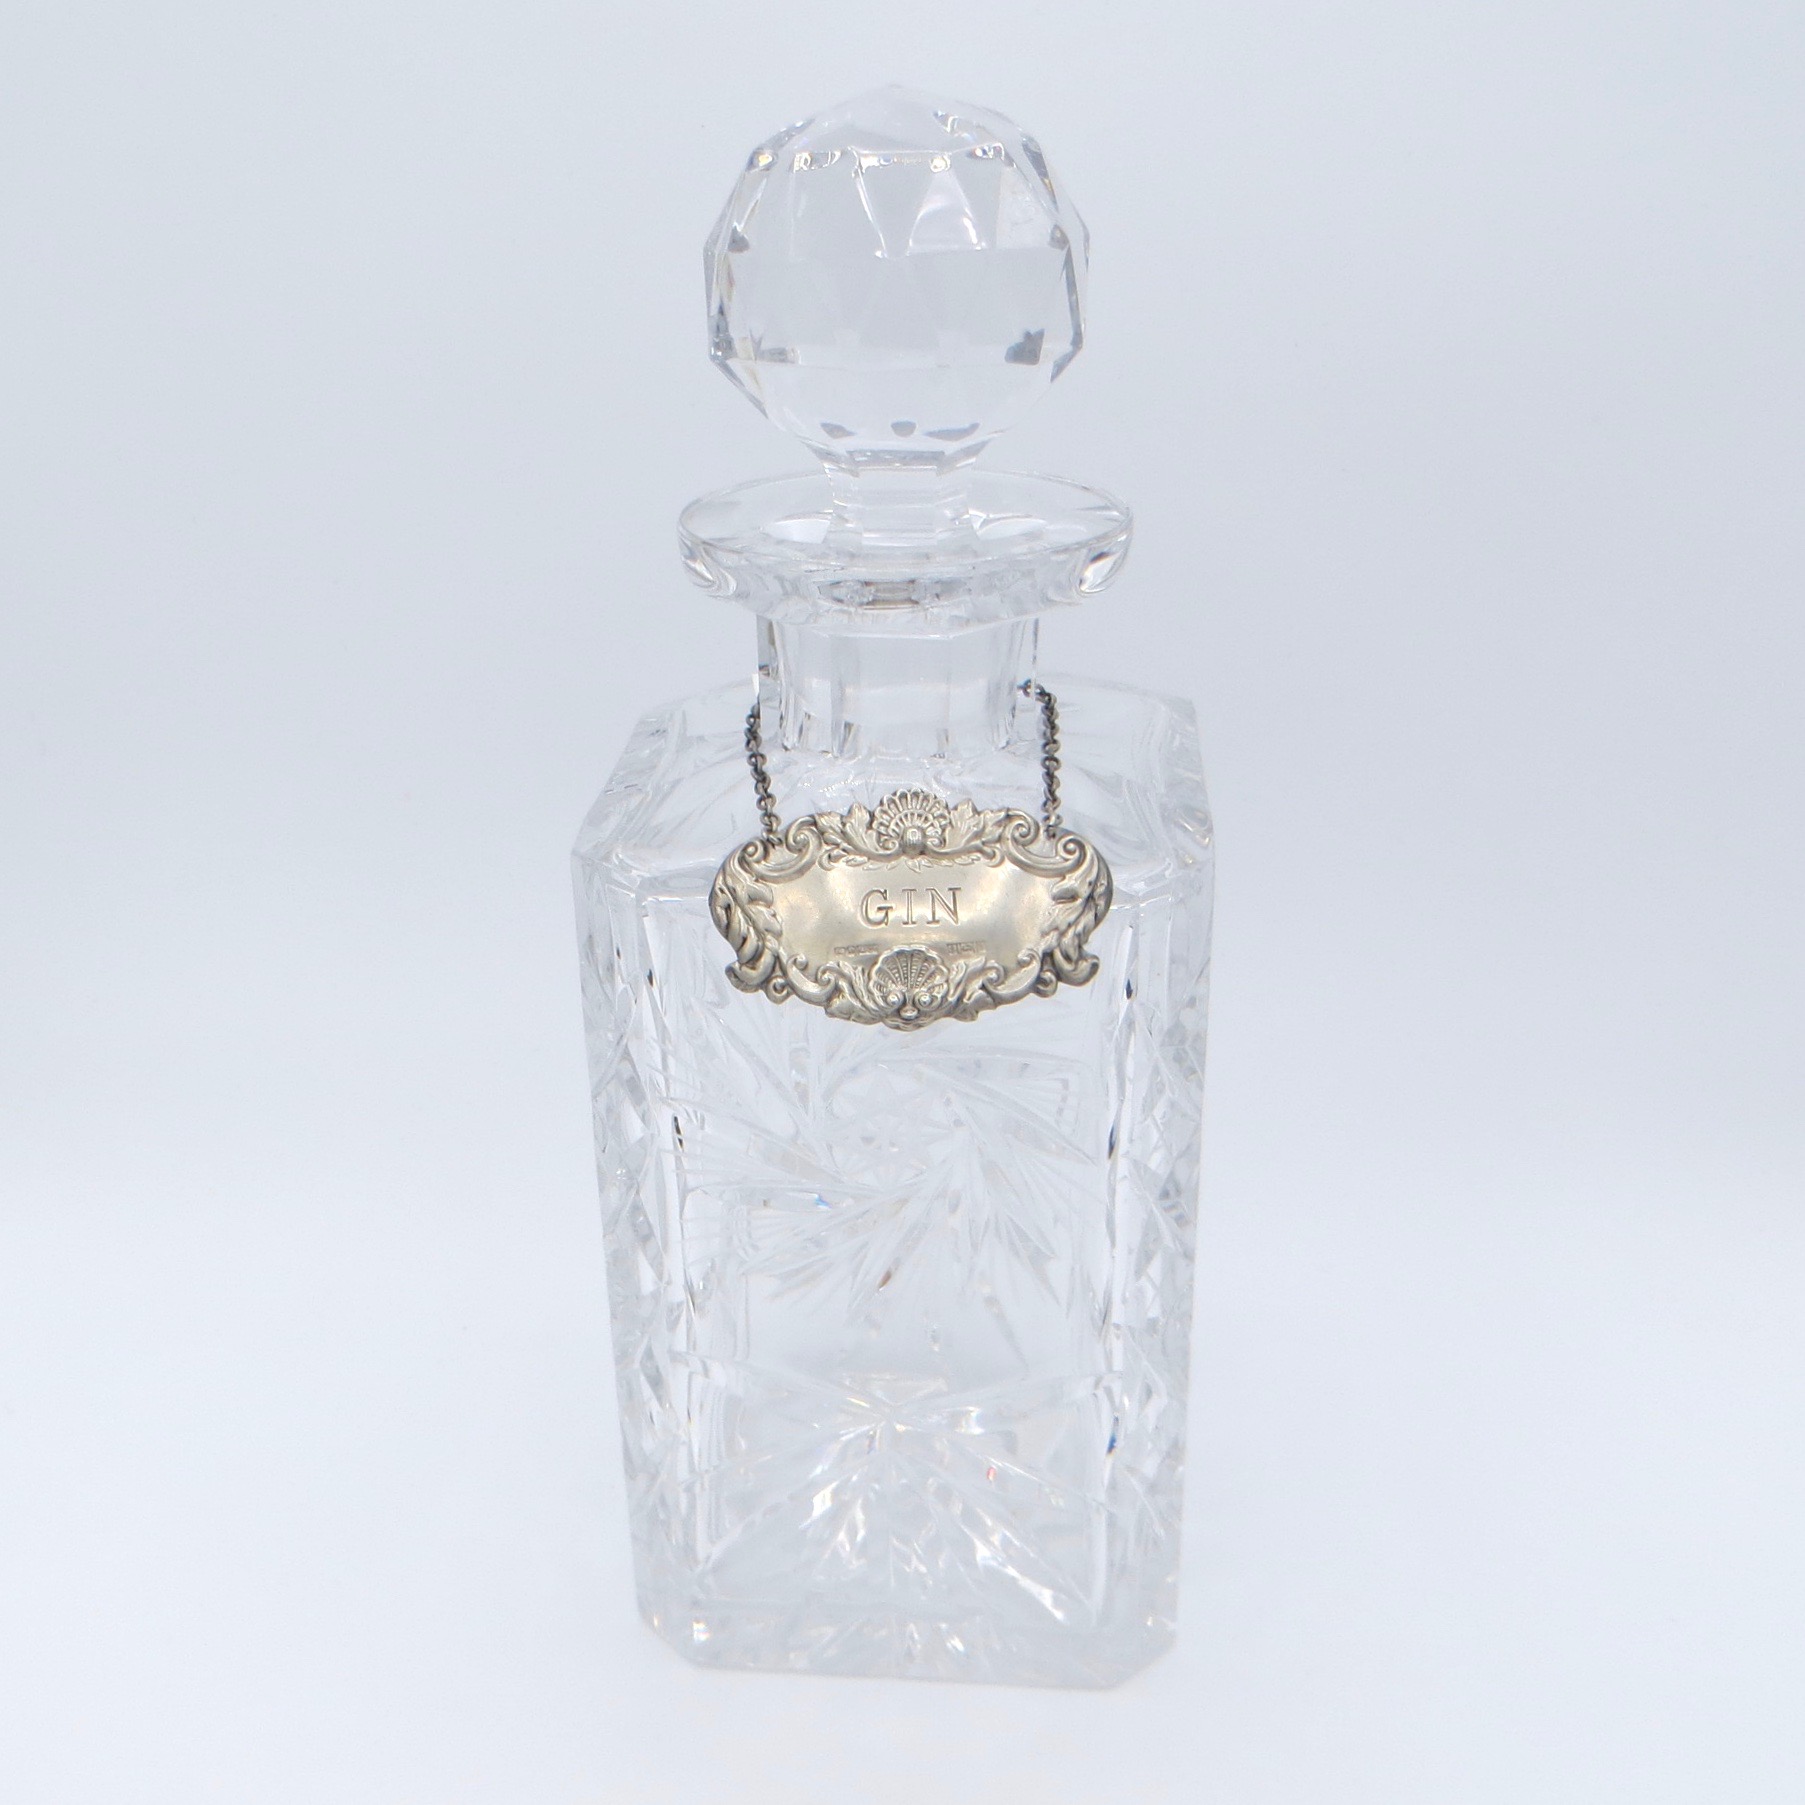 A square cut crystal decanter with a round stopper and a silver label reading "gin"